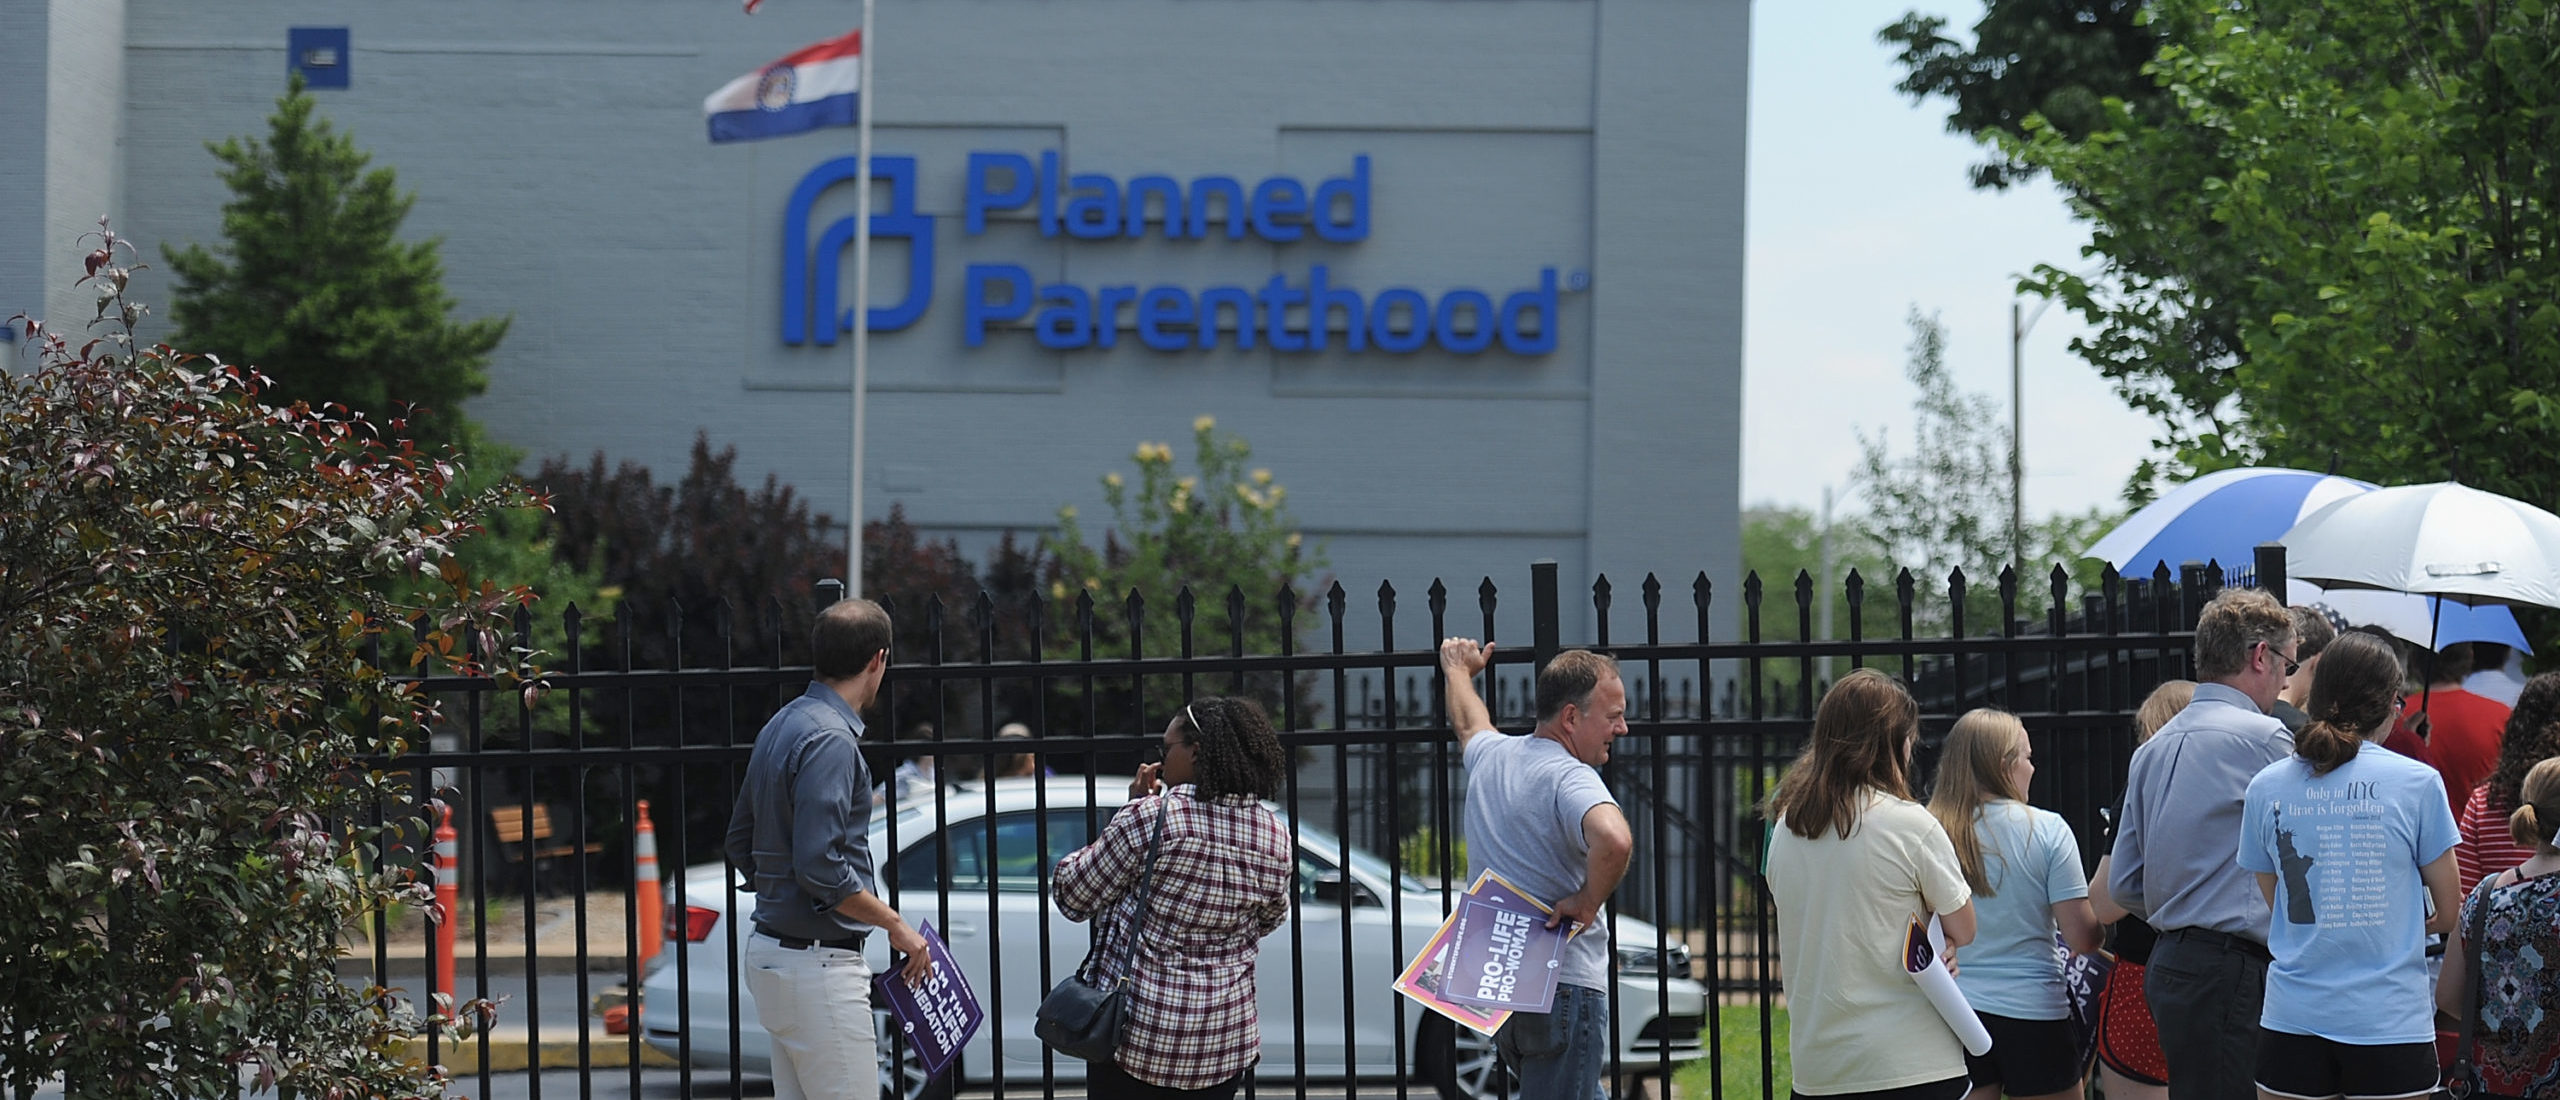 ST LOUIS, MO - JUNE 04: A group of demonstrators gather during a pro-life rally outside the Planned Parenthood Reproductive Health Center on June 4, 2019 in St Louis, Missouri. The fate of Missouri's lone abortion clinic could be decided today in St. Louis Circuit Court after a restraining order prohibiting Missouri from letting the clinic's license lapse was granted last week. (Photo by Michael B. Thomas/Getty Images)